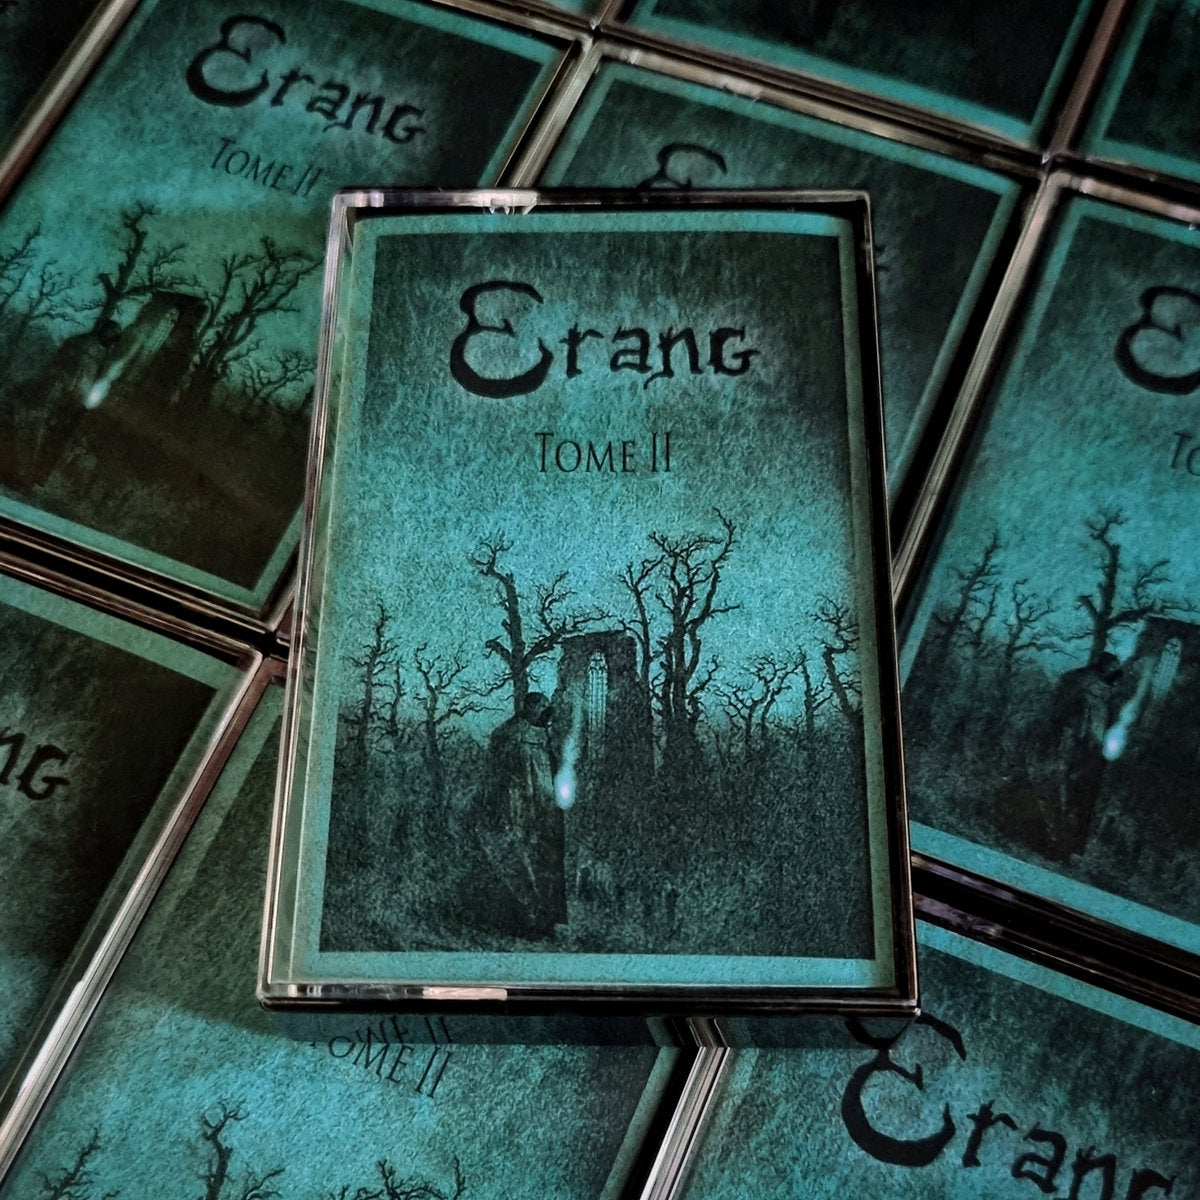 [SOLD OUT] ERANG "Tome II" Cassette Tape (lim.150)